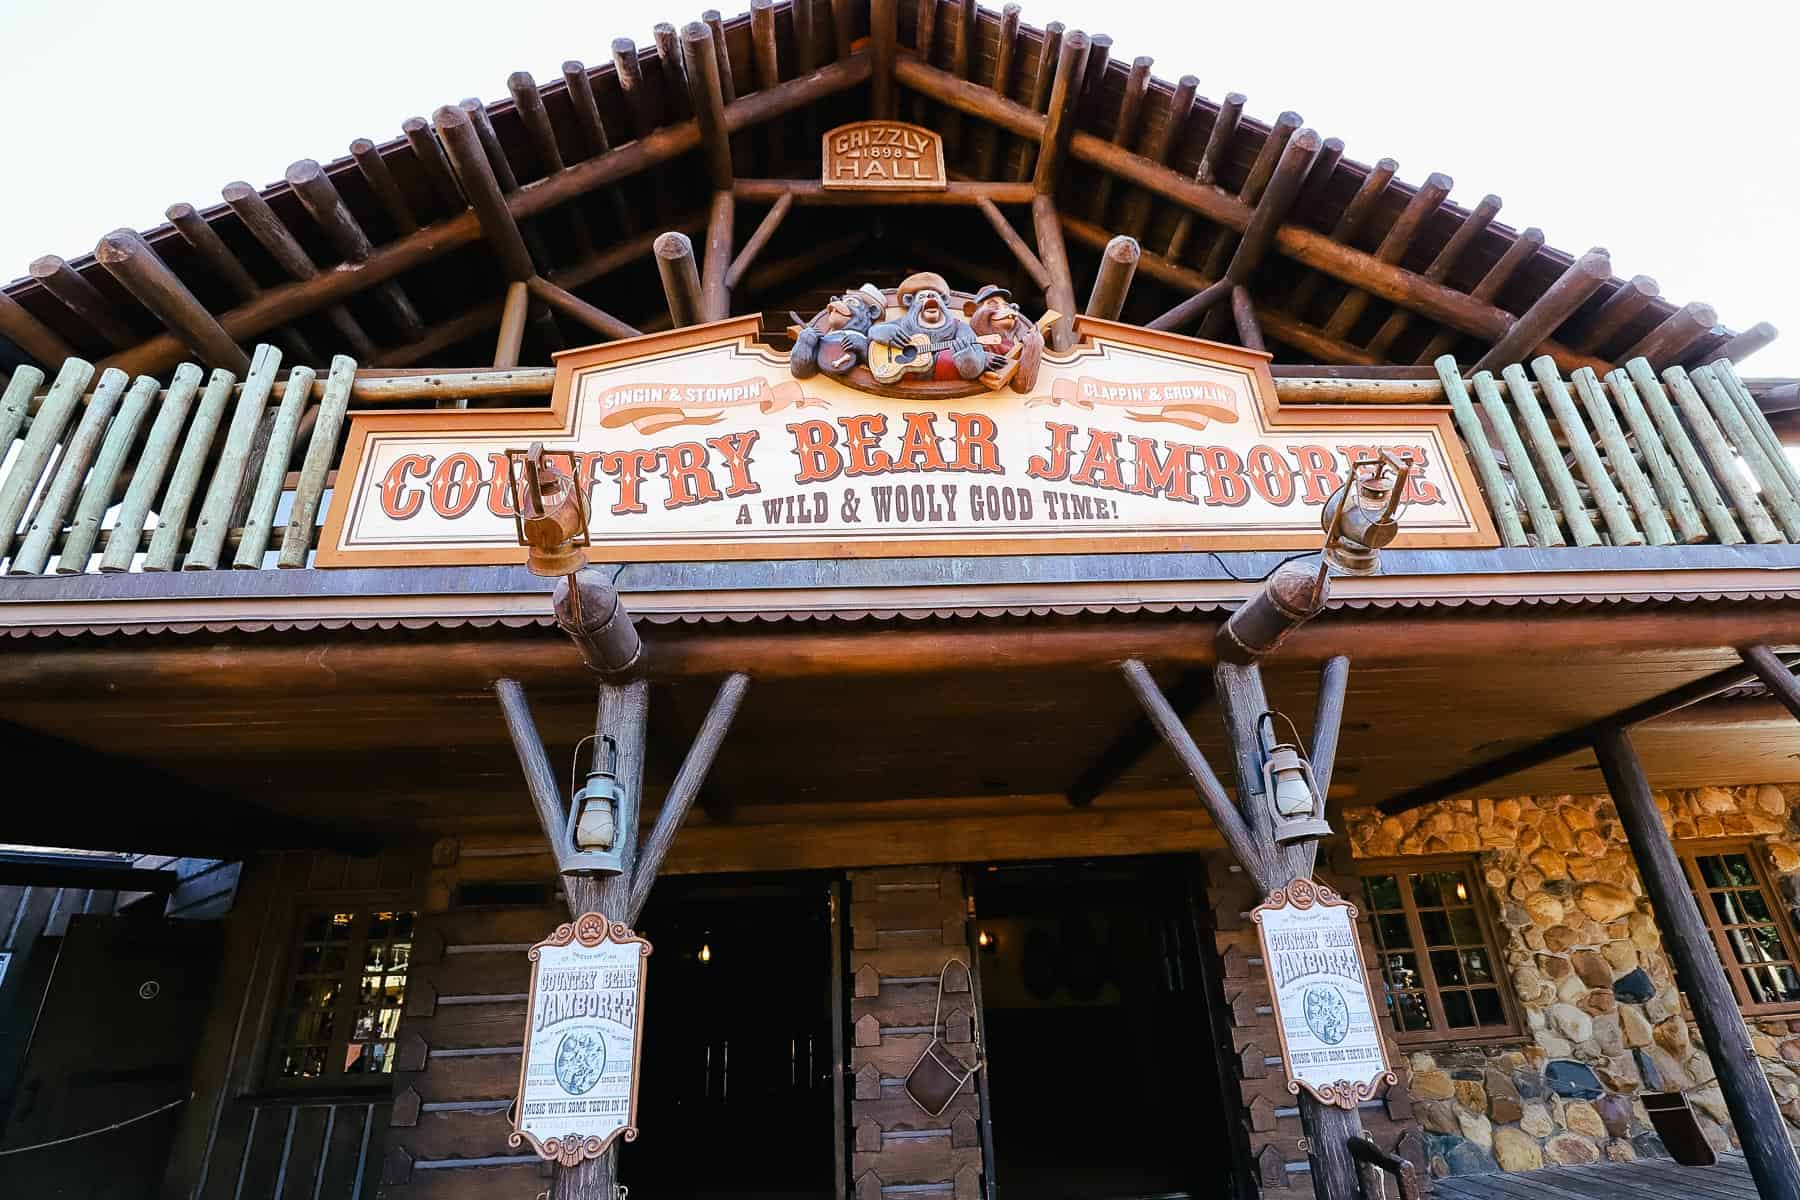 Sign over the Country Bear Jamboree says A Wild and Wooly Good Time! 